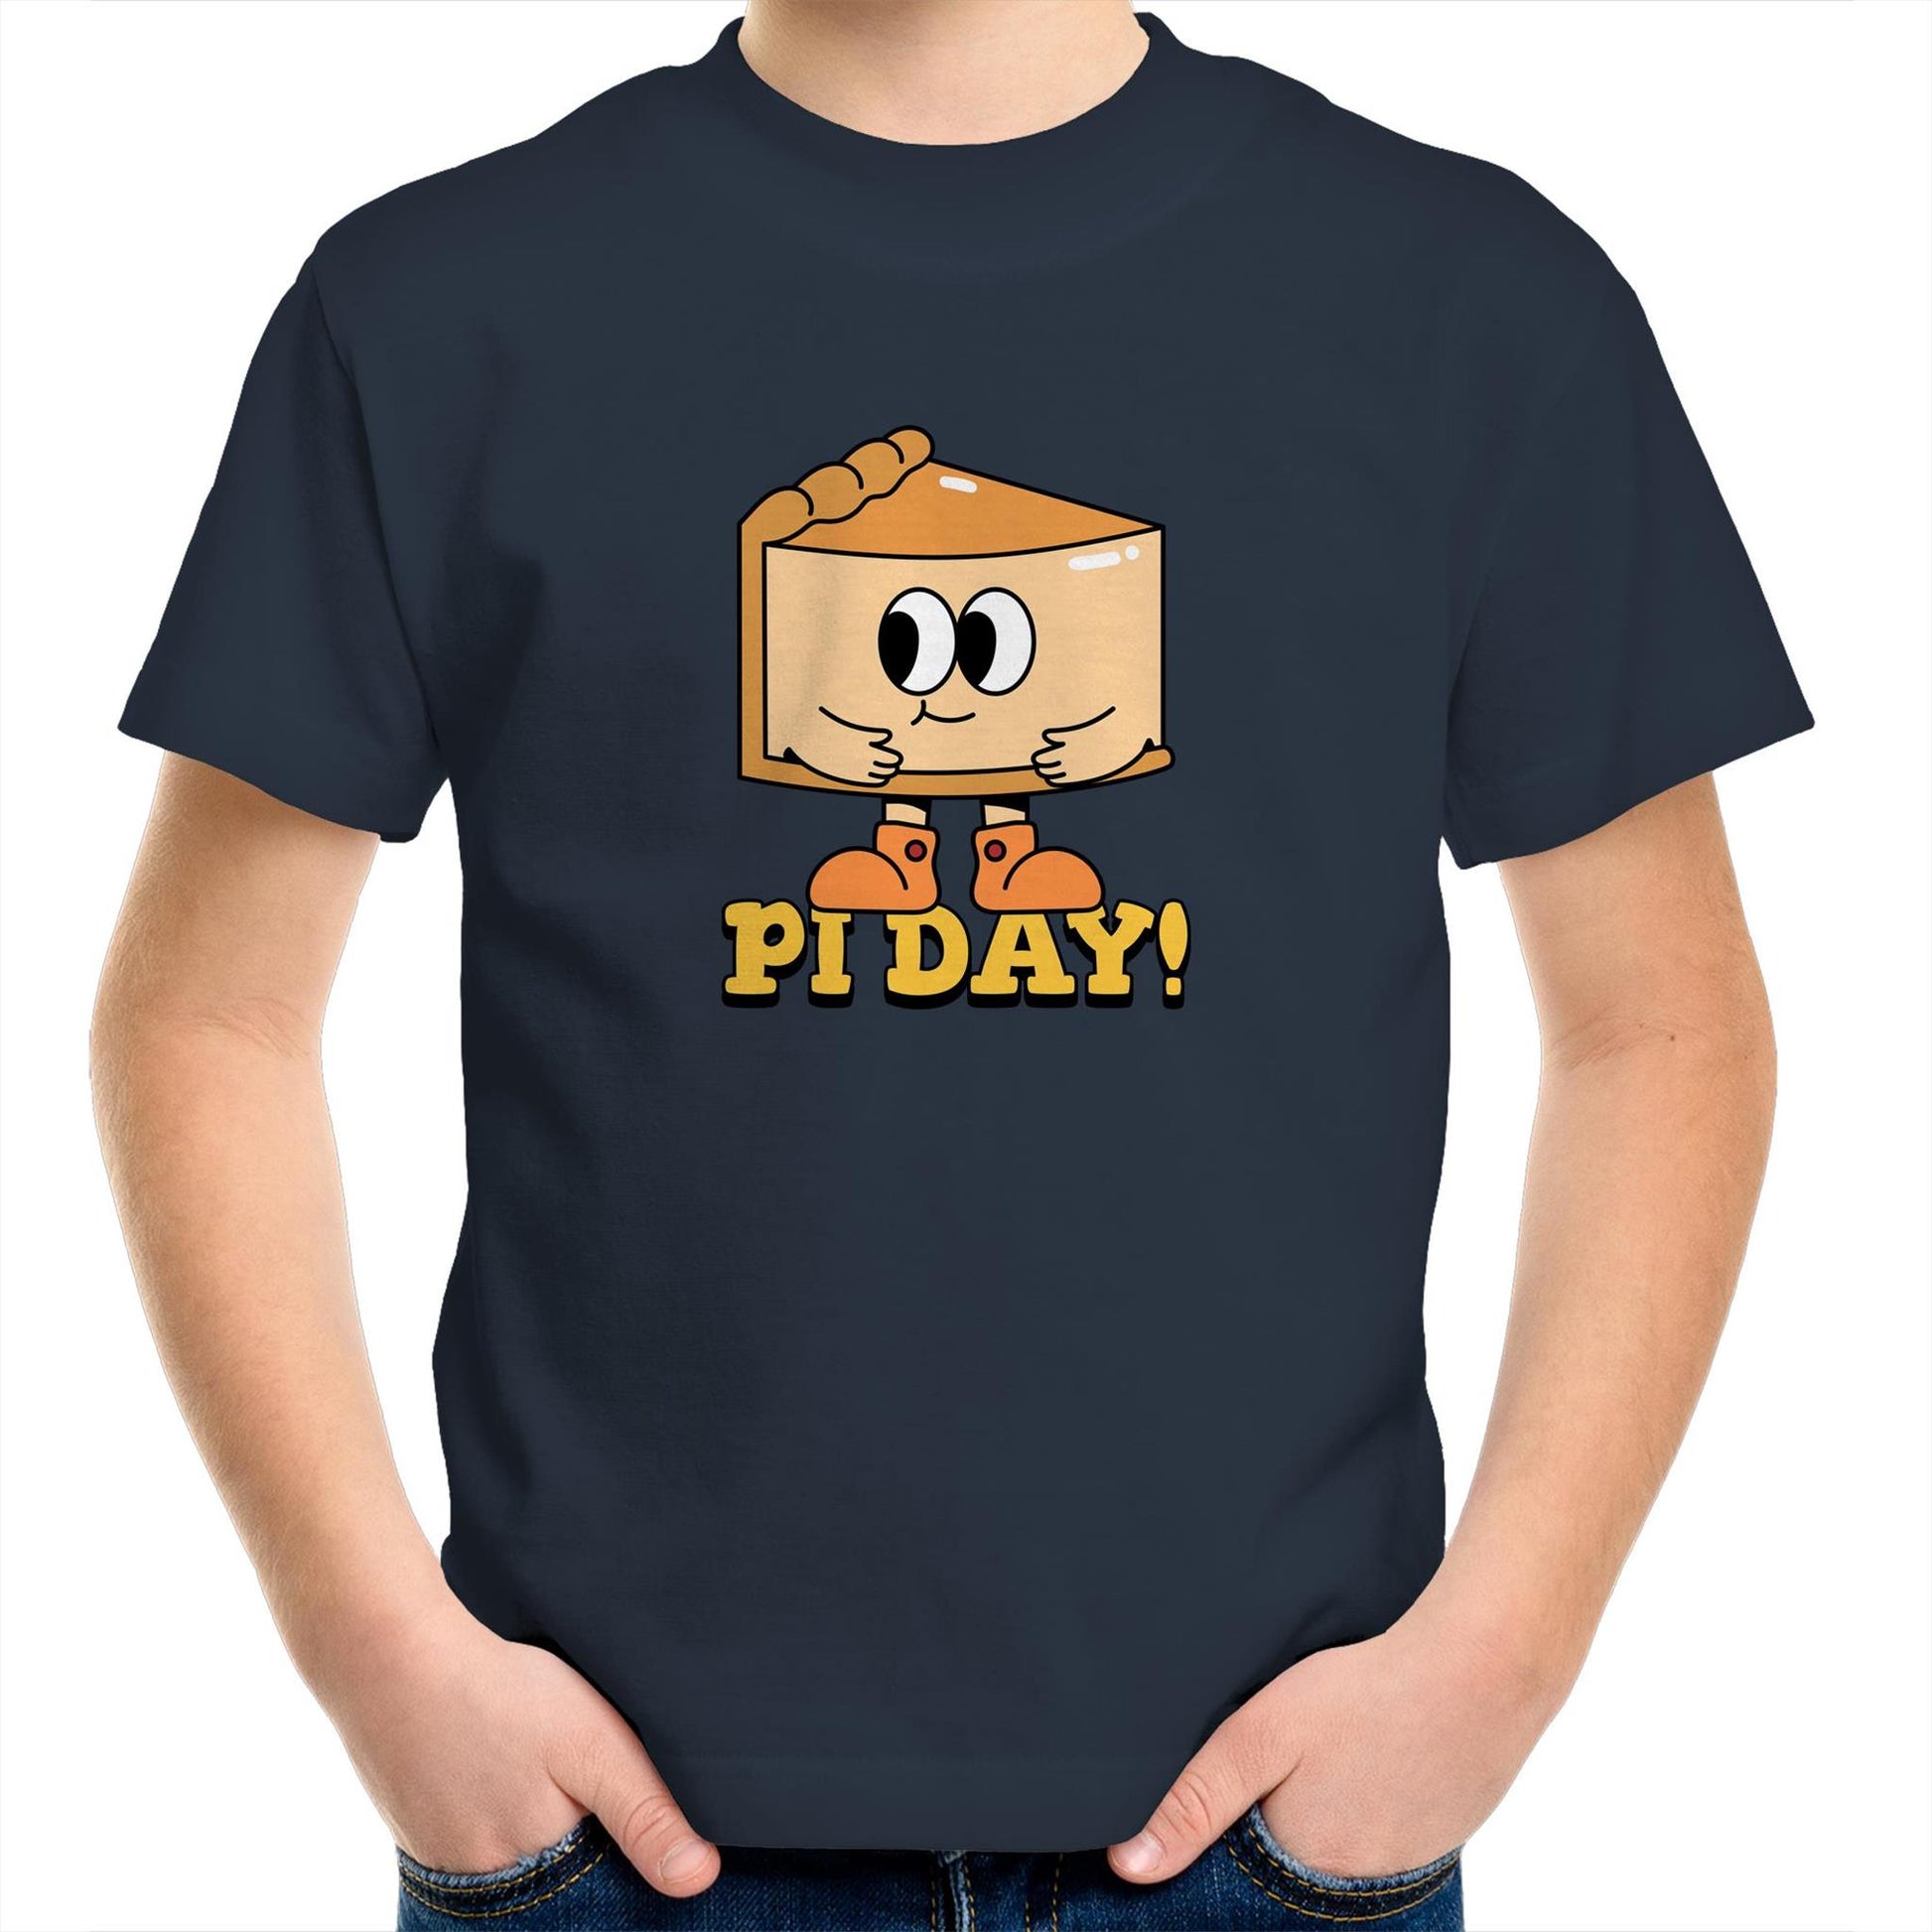 Pi Day - Kids Youth Crew T-Shirt Navy Kids Youth T-shirt Maths Science